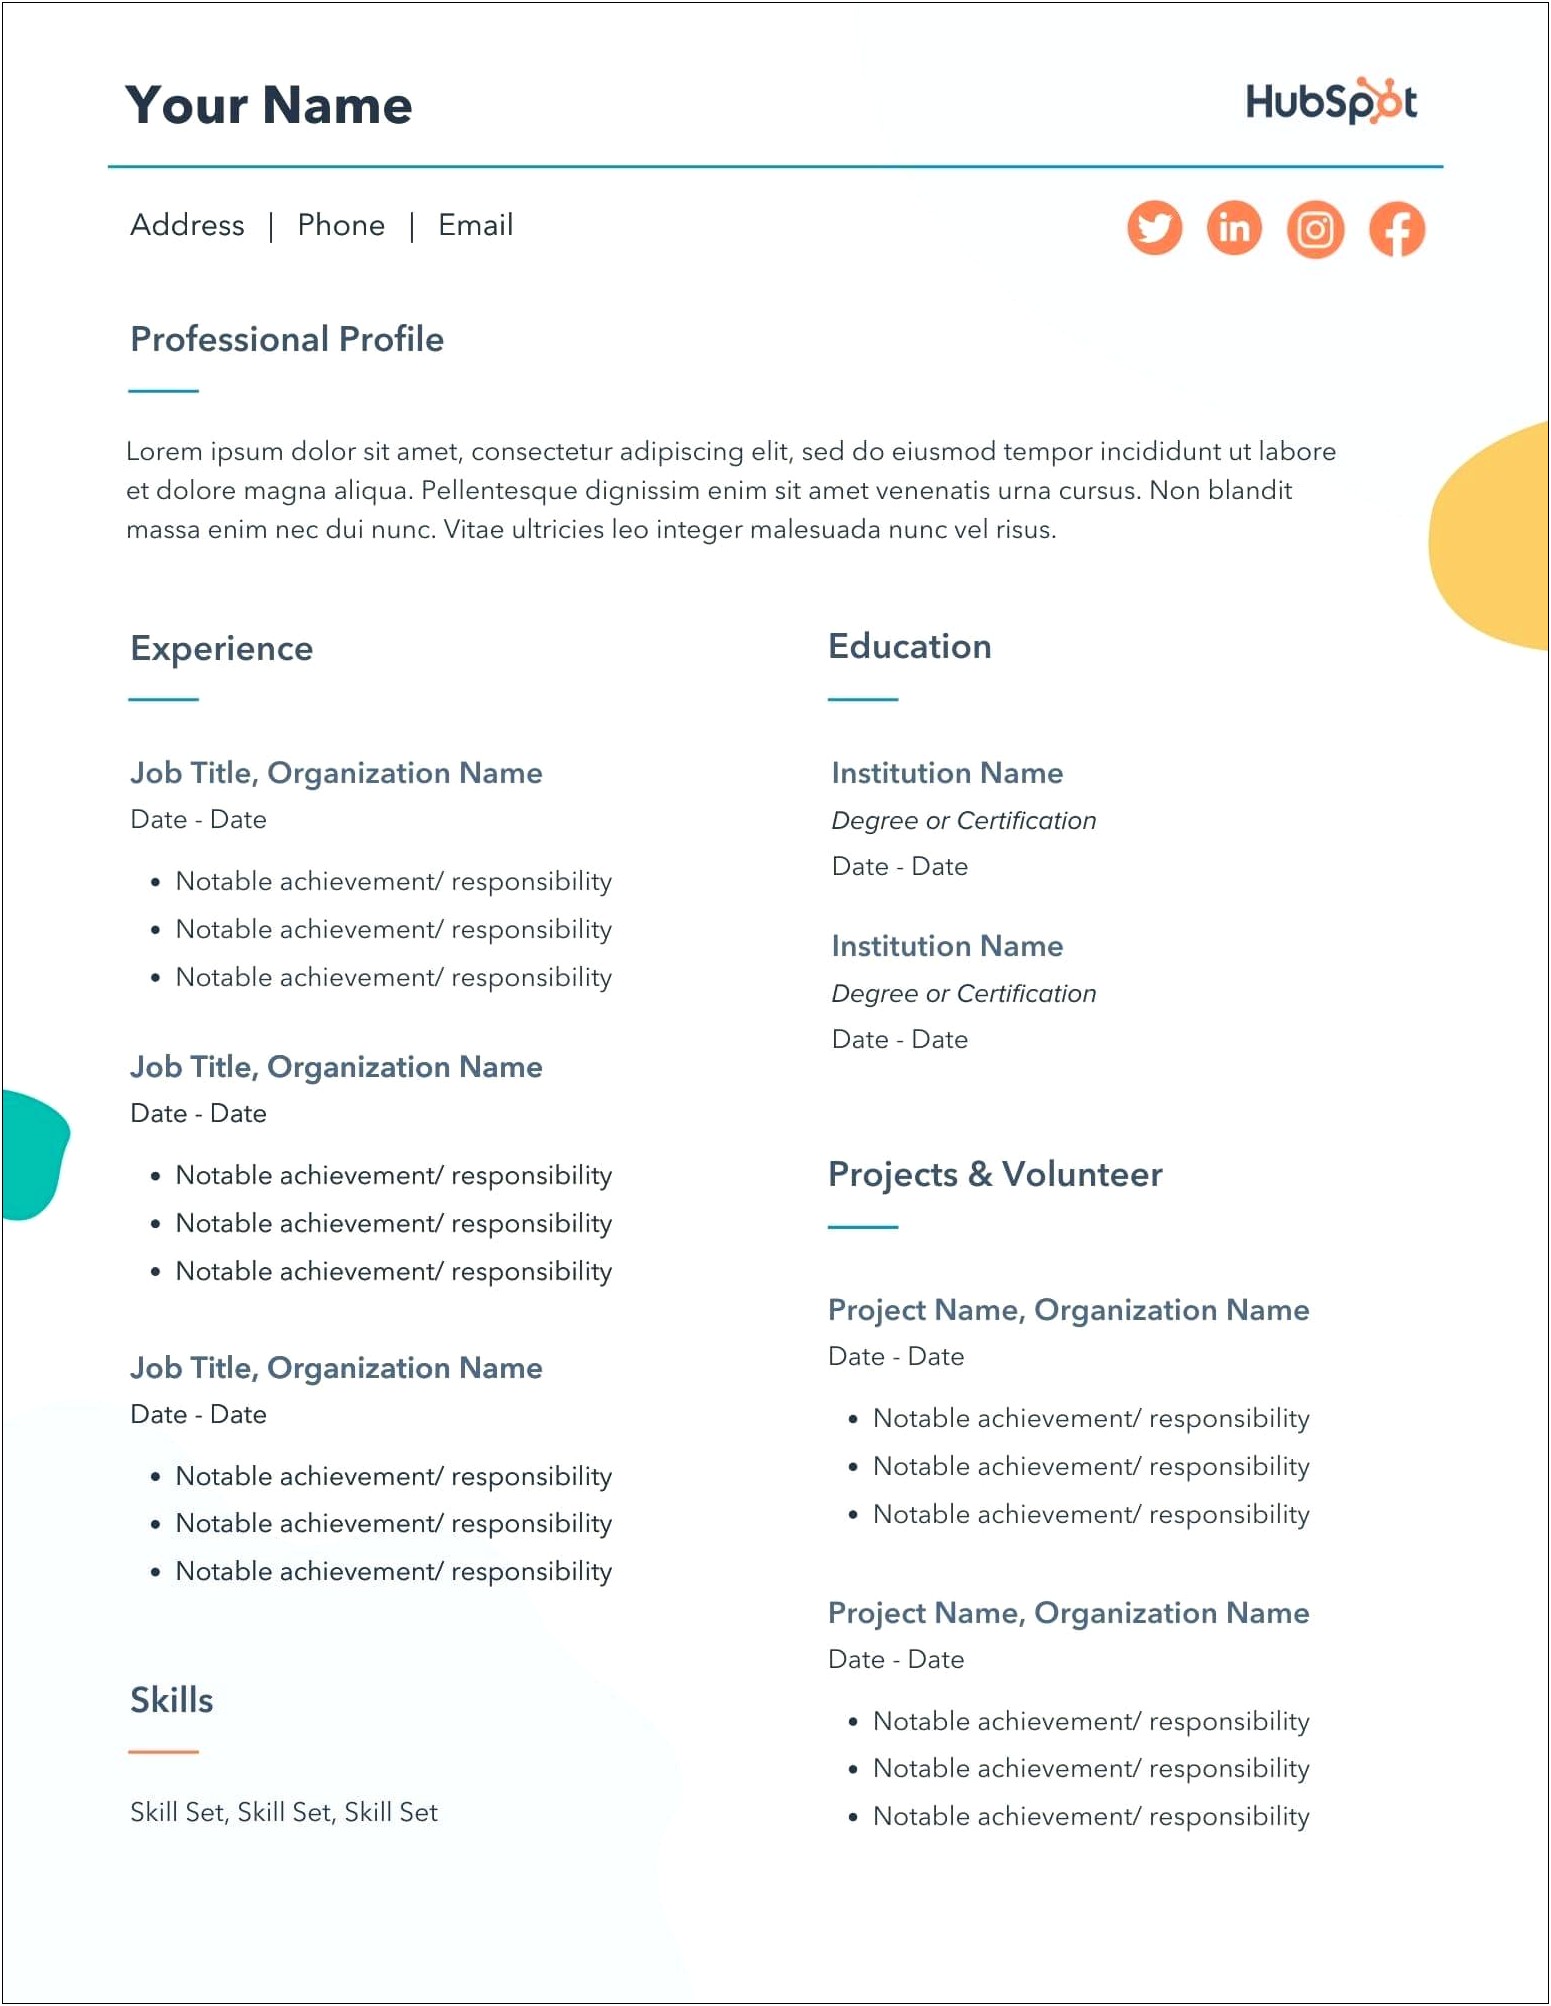 Sample Resume For Internship With No Experience Pdf